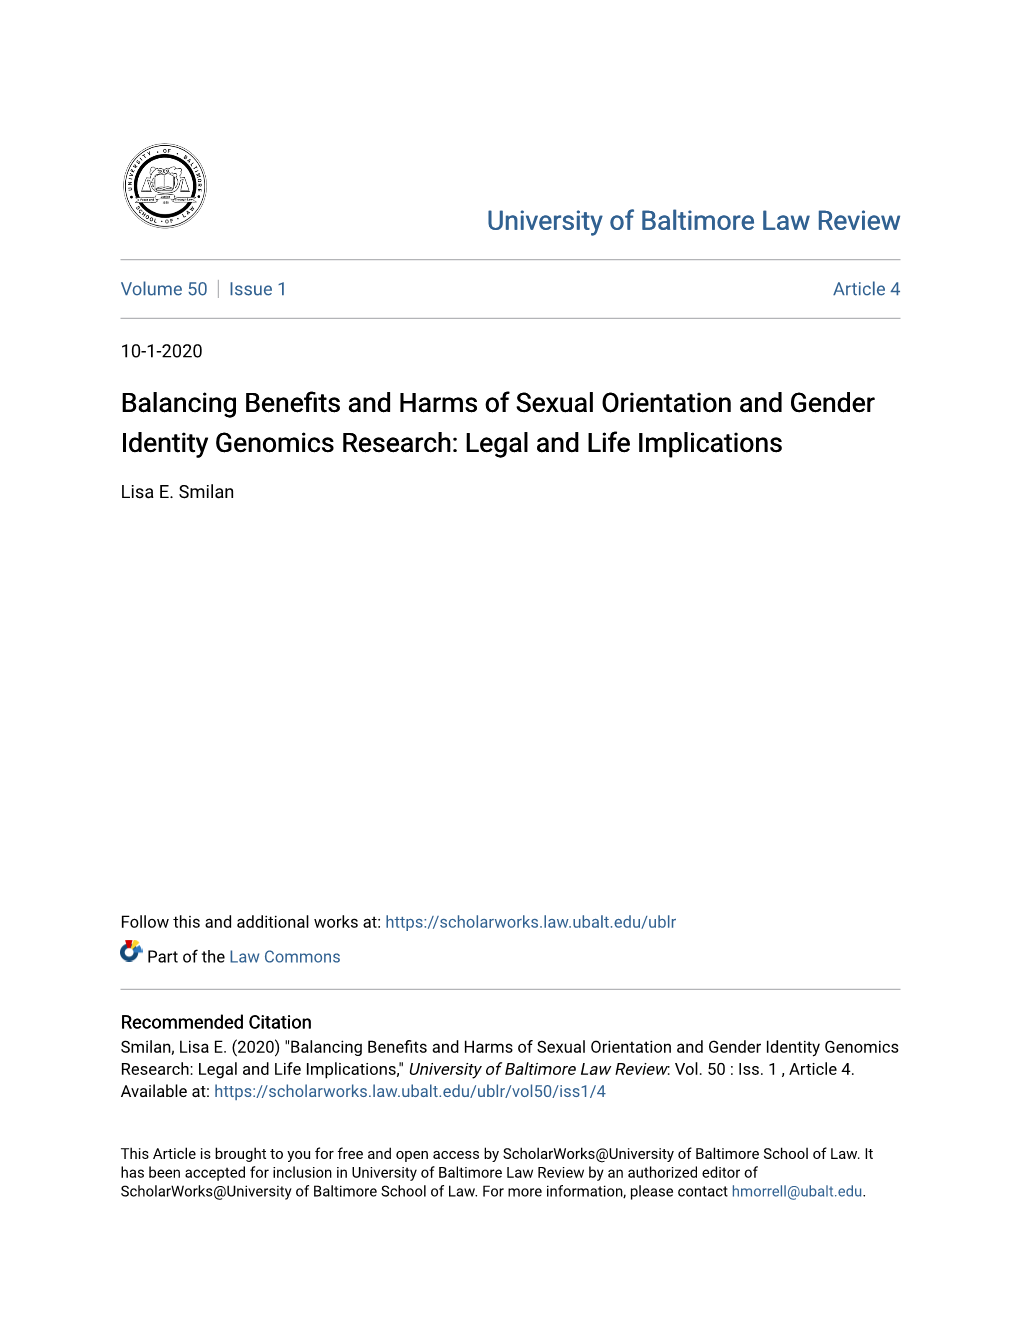 Balancing Benefits and Harms of Sexual Orientation and Gender Identity Genomics Research: Legal and Life Implications